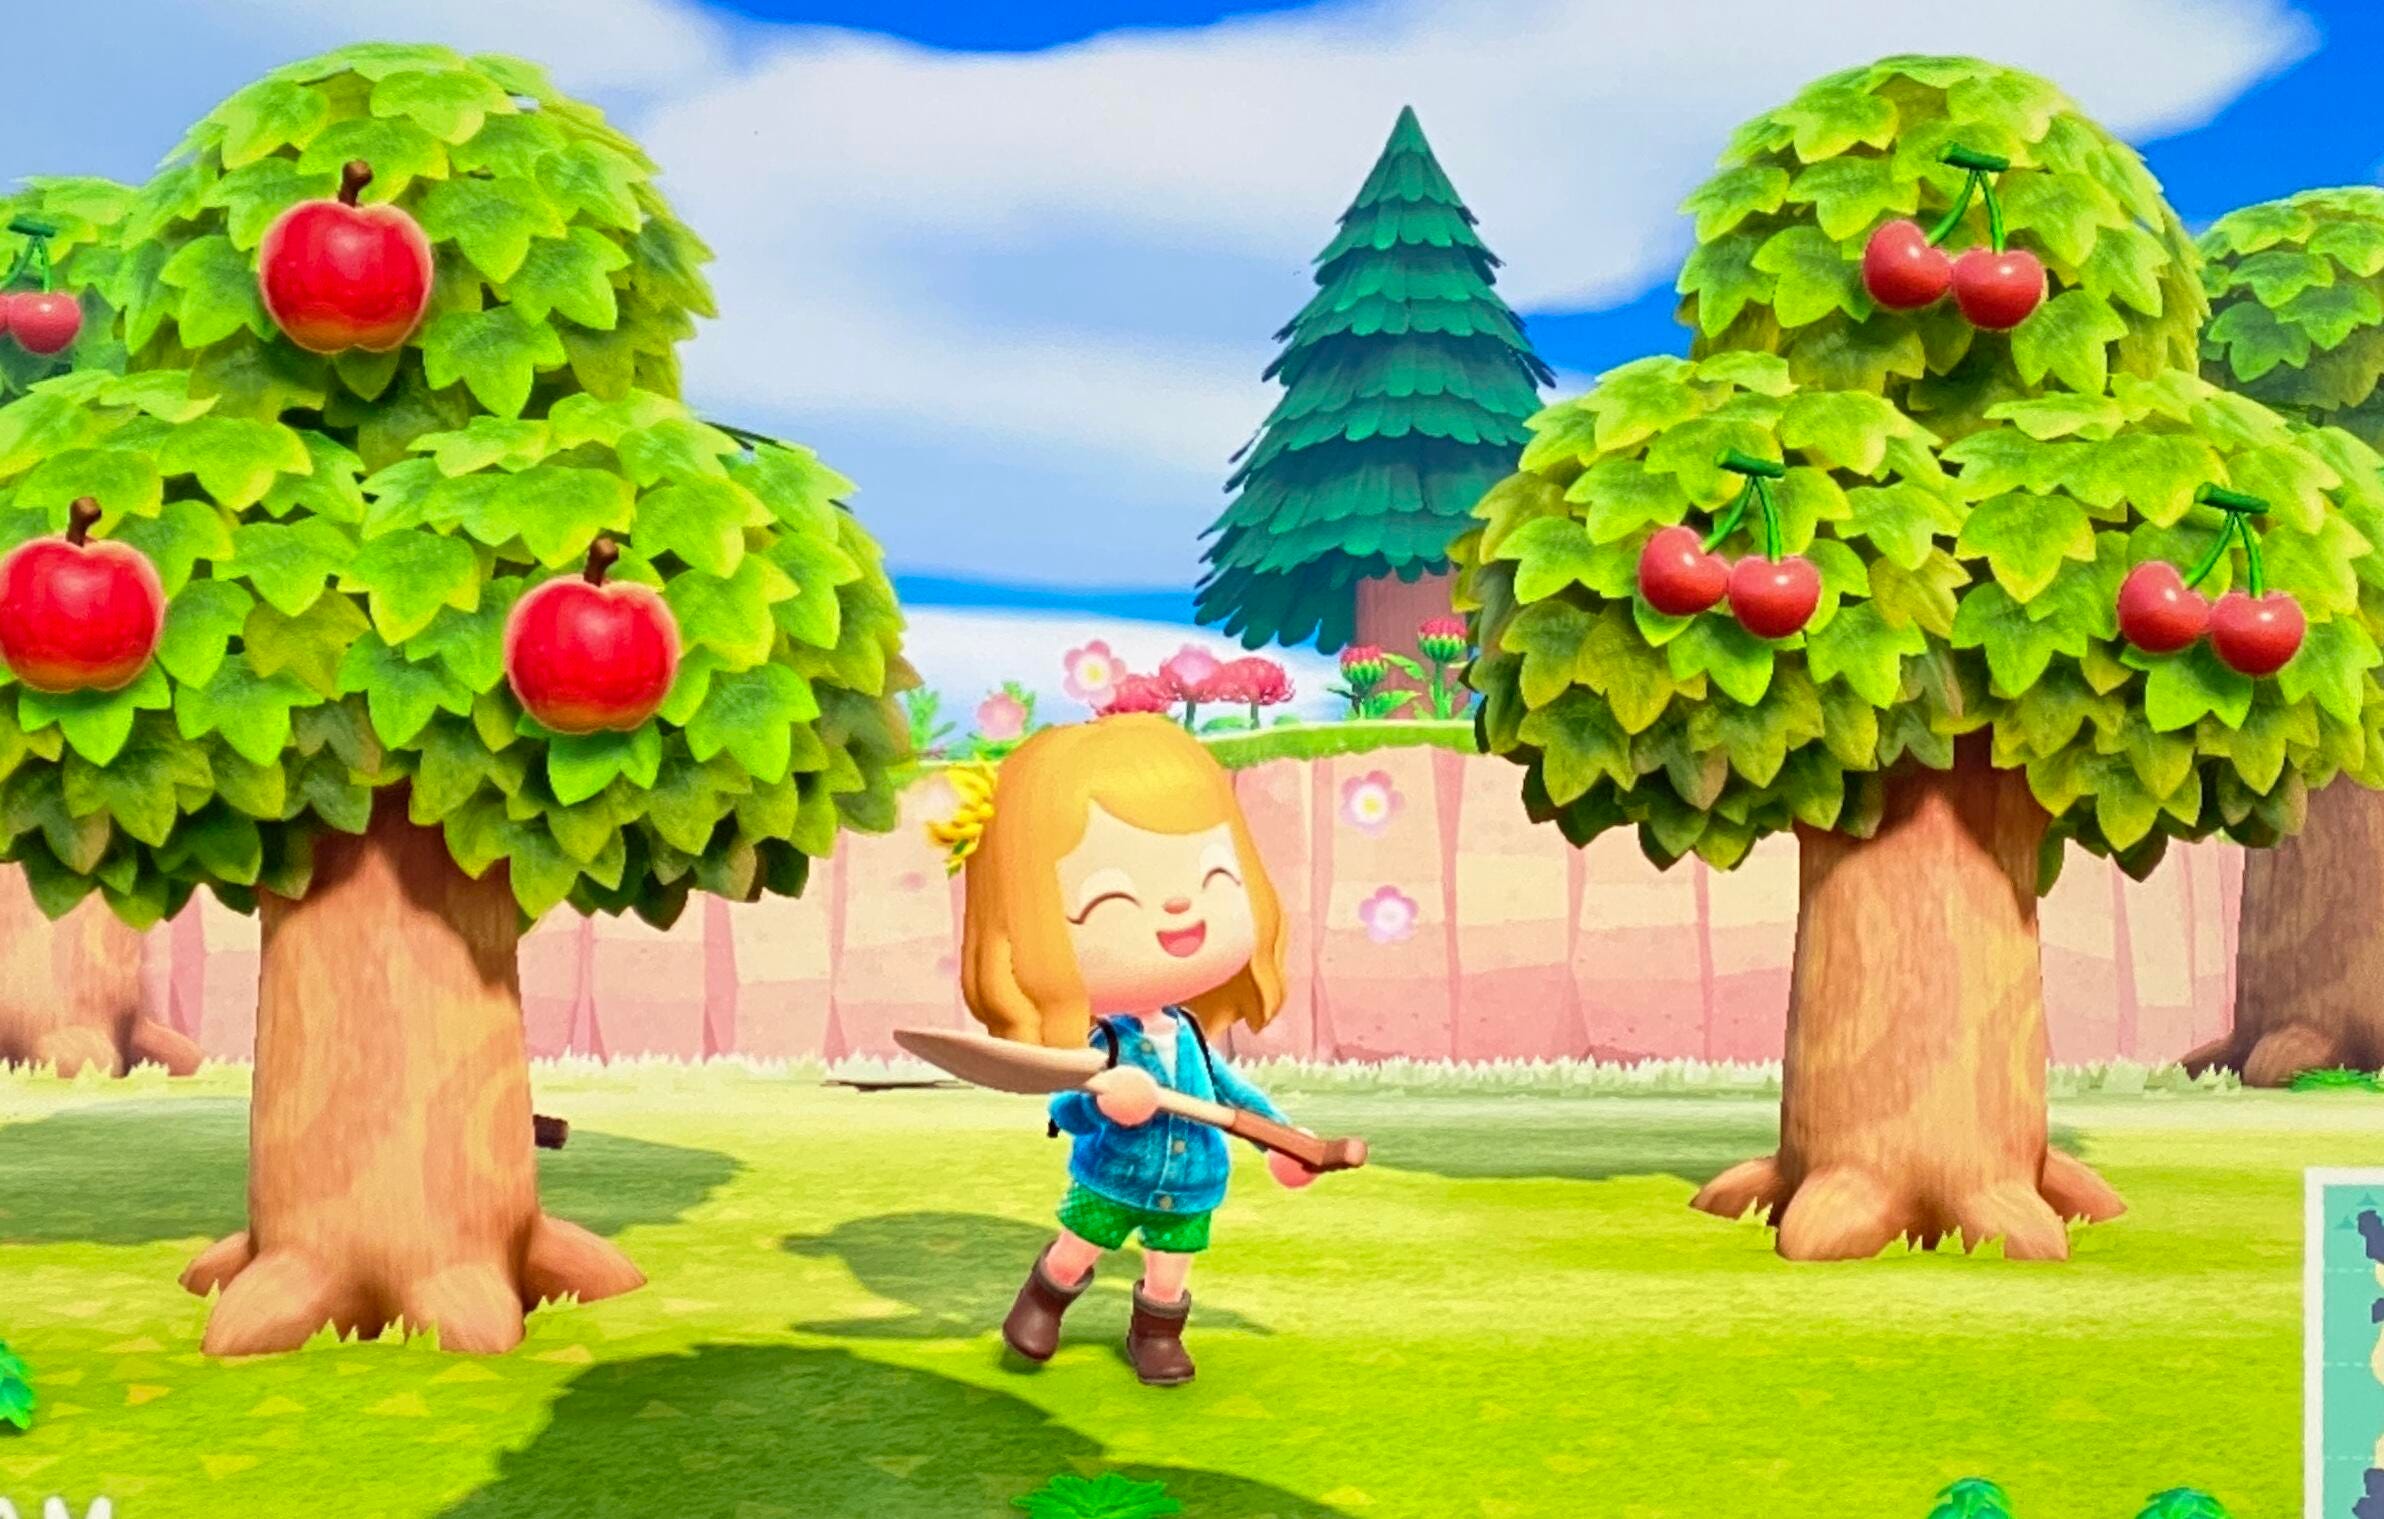 More games to play with your friends in Animal Crossing: New Horizons